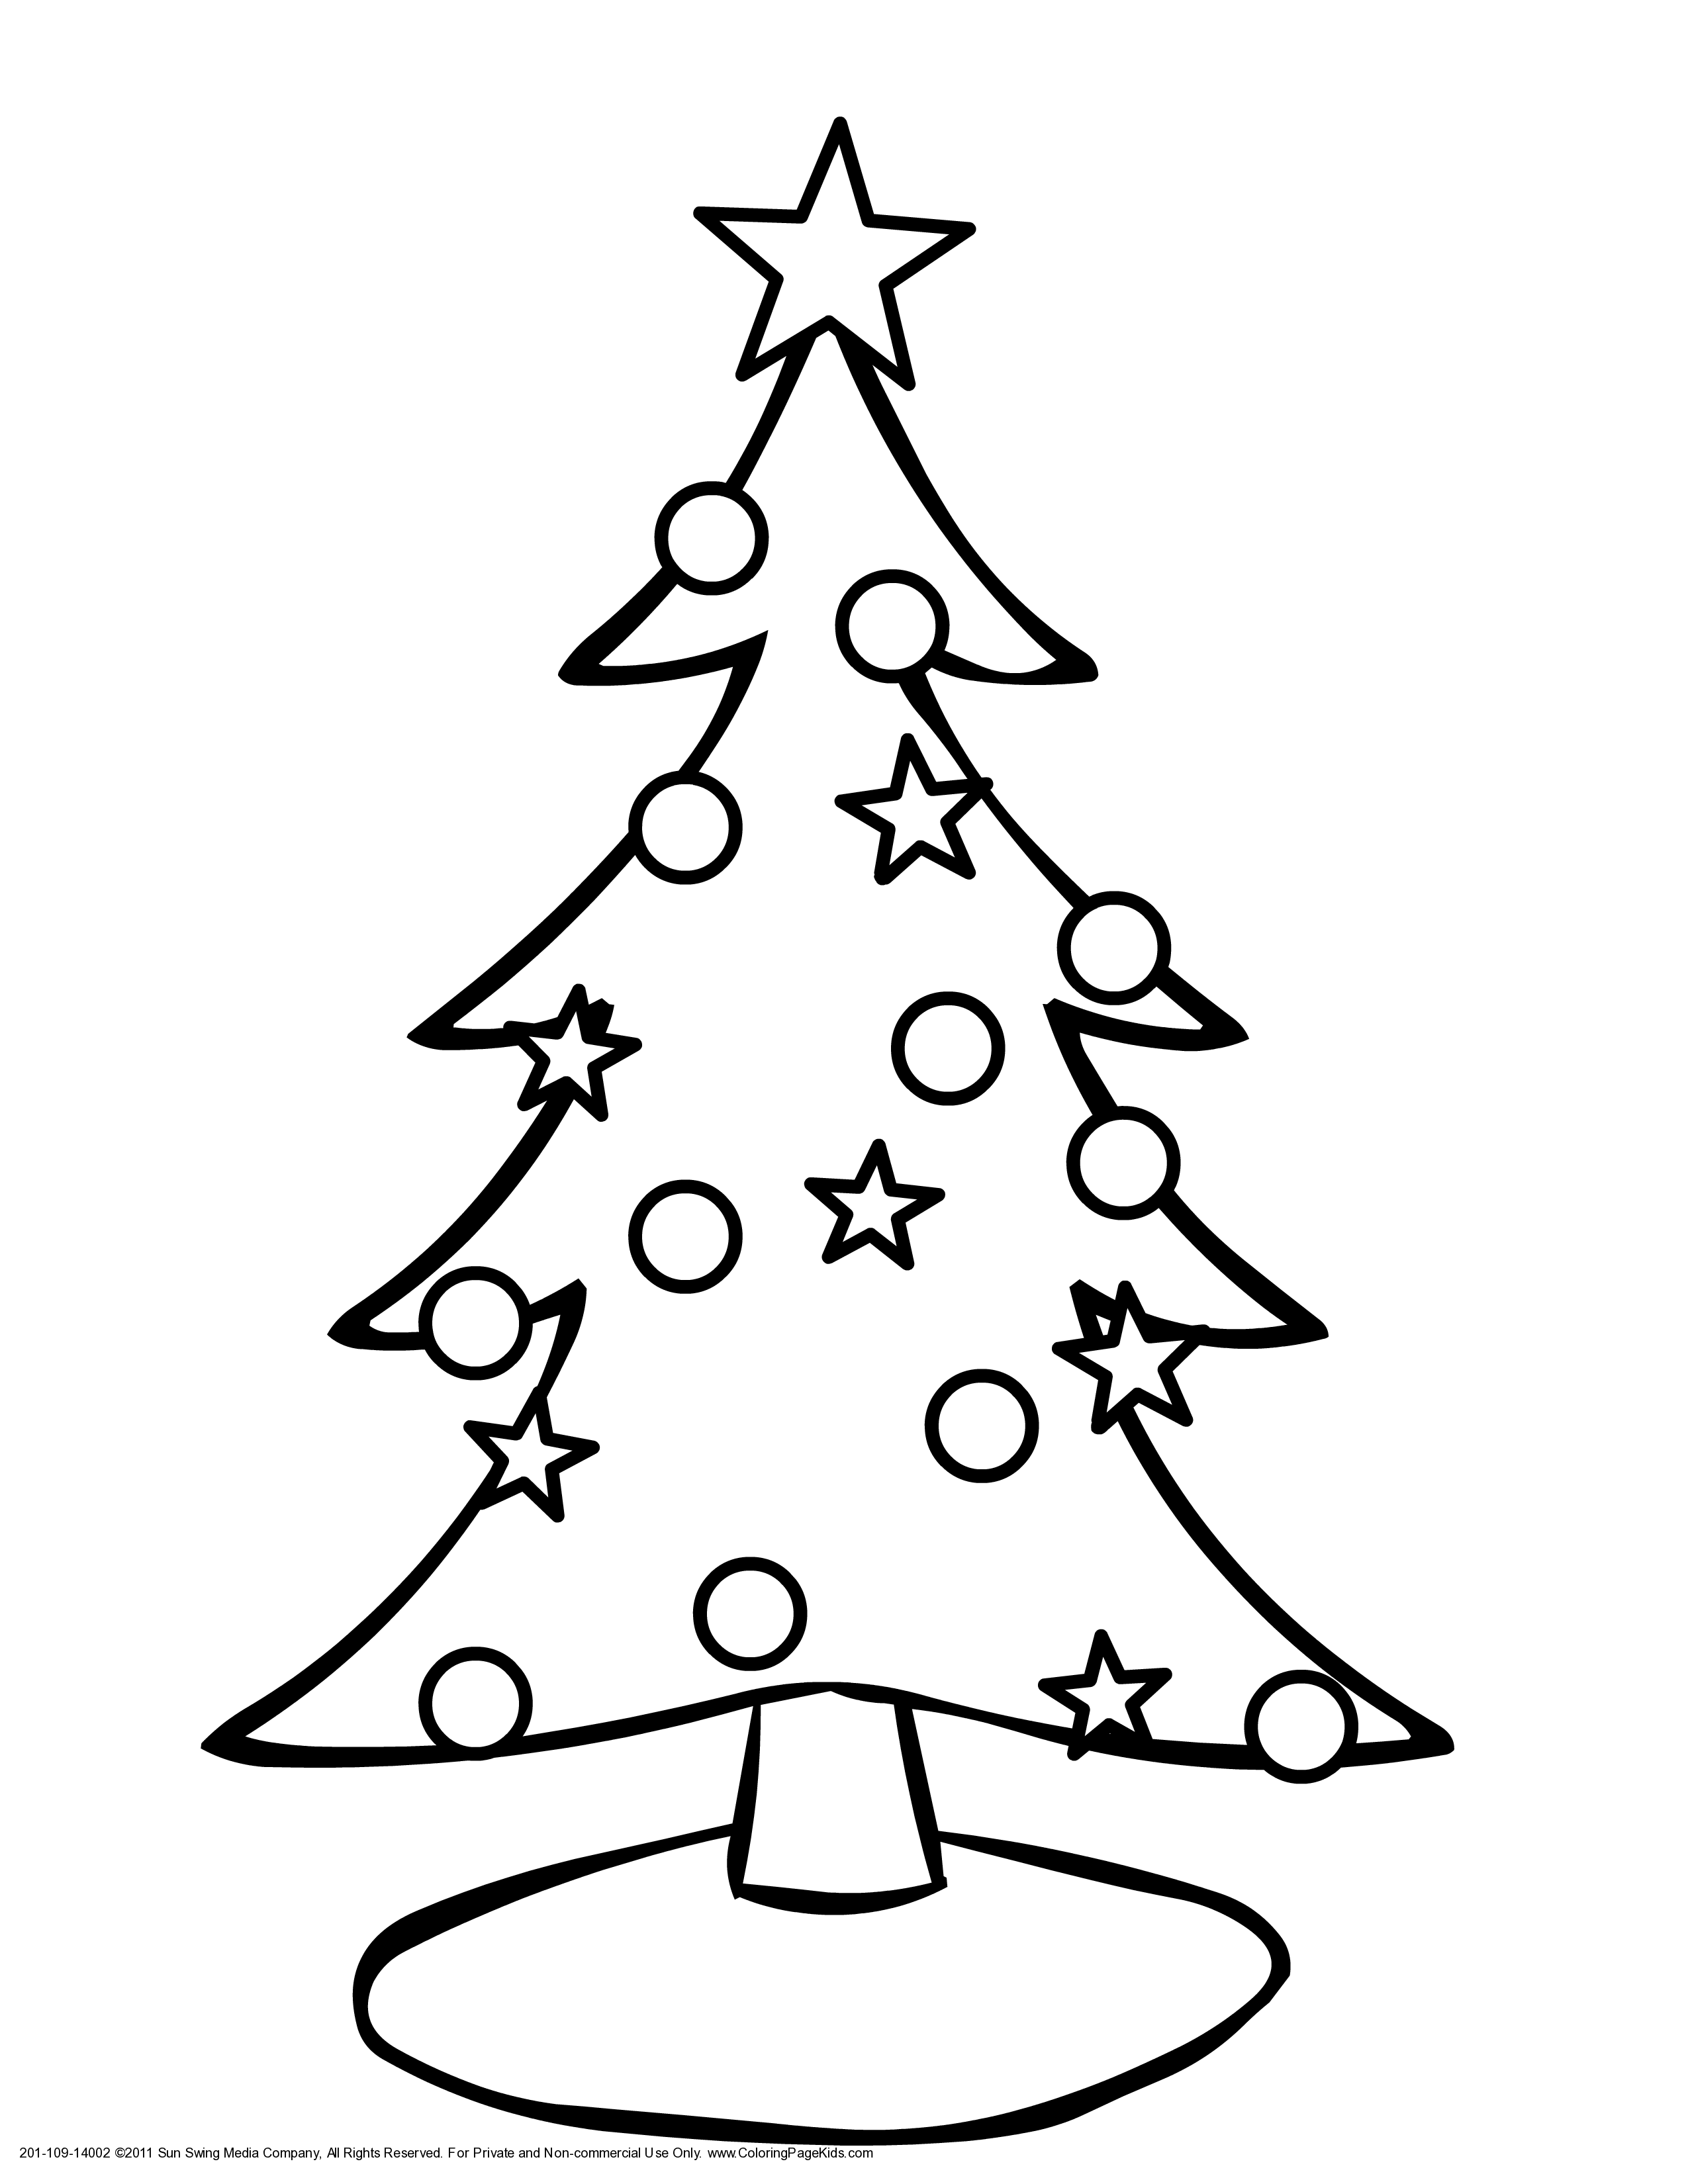 Christmas tree coloring pages - coloring book - #7